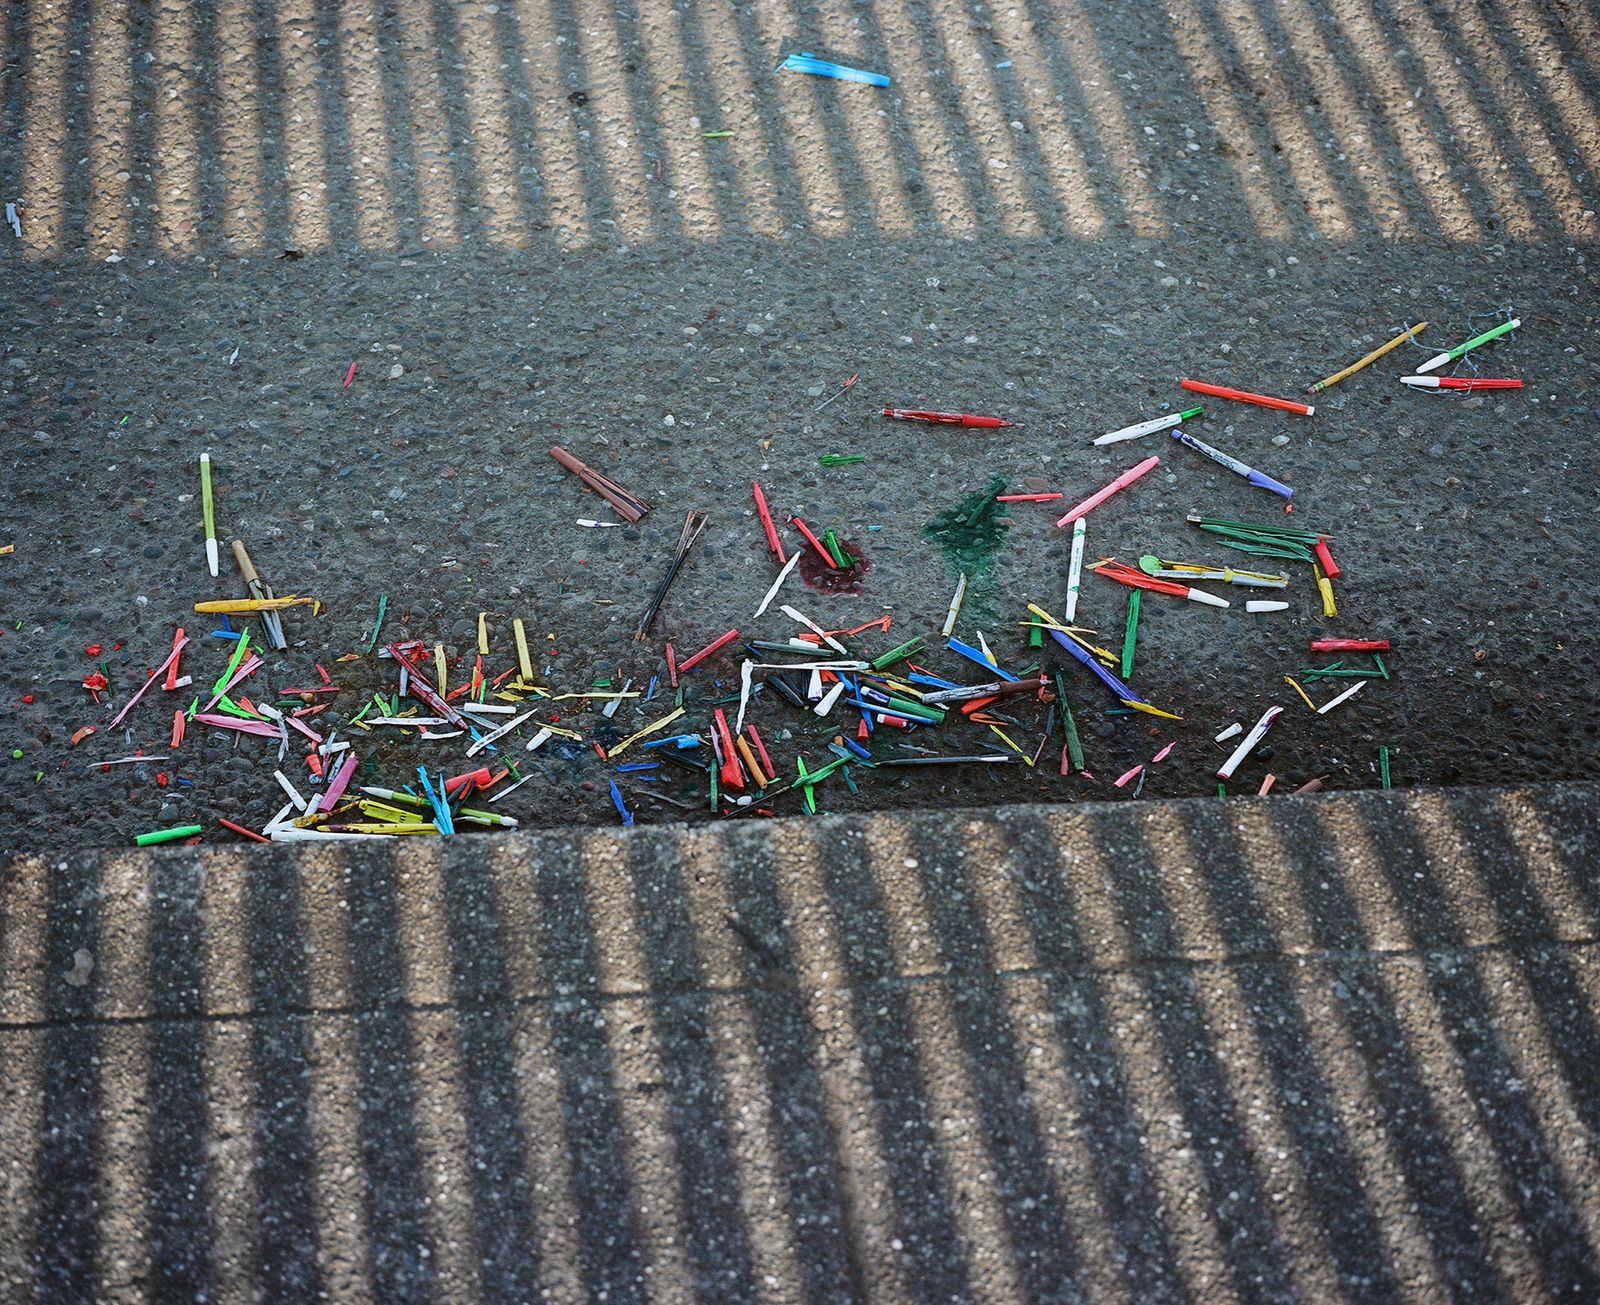 © Justin Maxon - A pile of broken pens is seen on the street after a car drove them over, in Eureka,